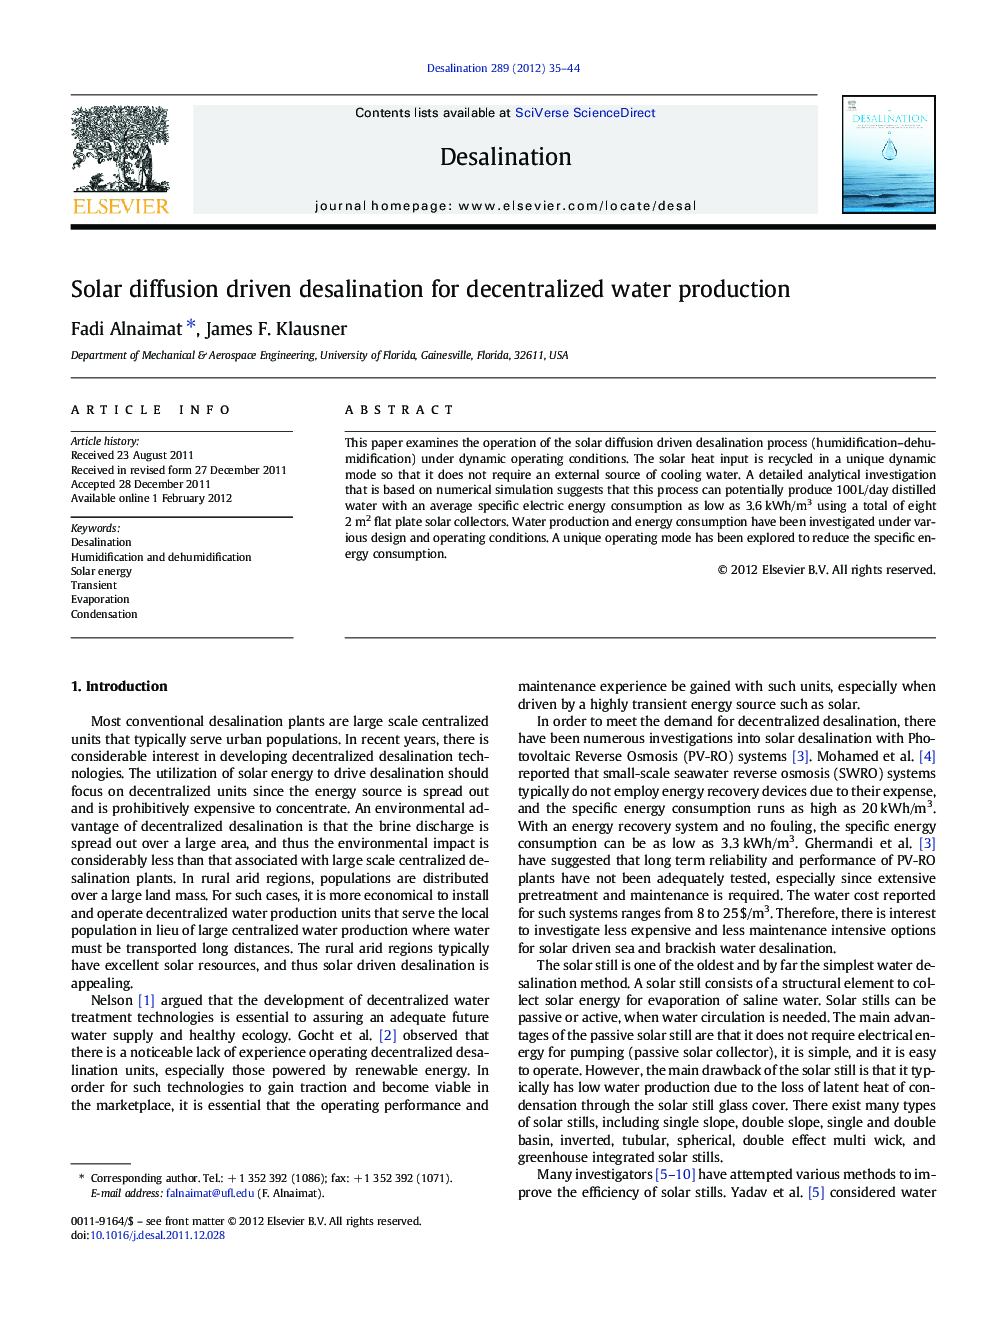 Solar diffusion driven desalination for decentralized water production